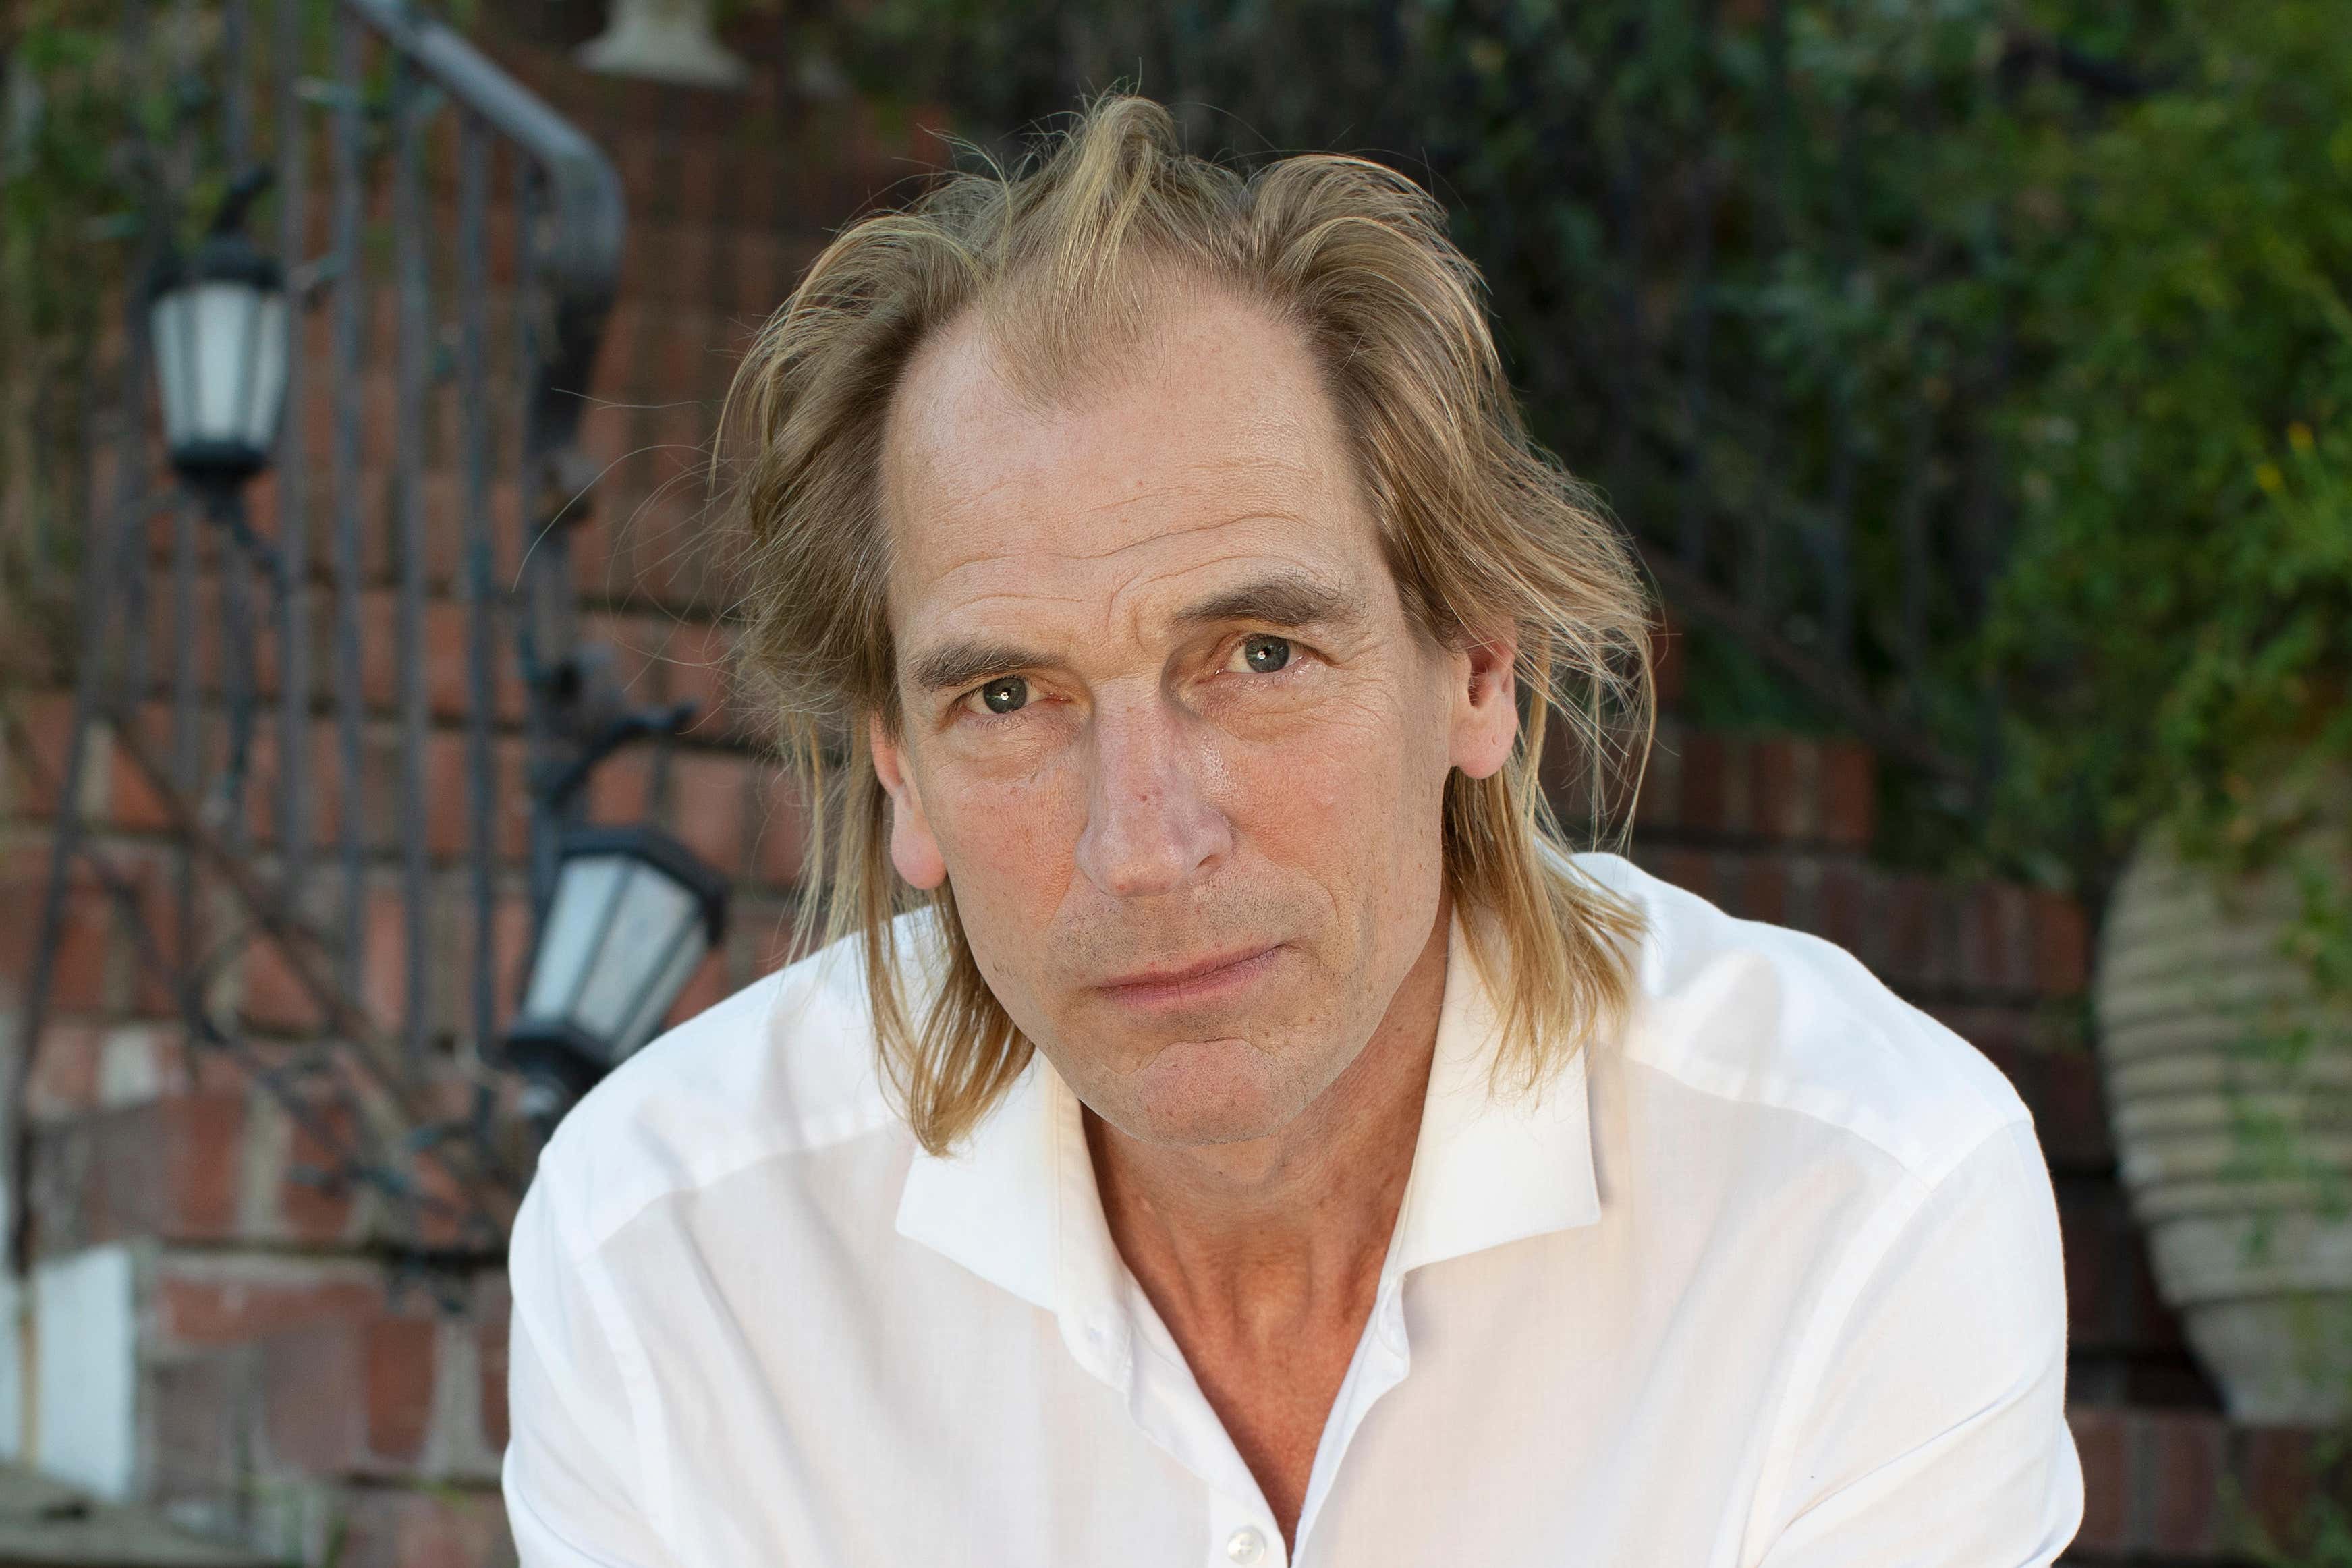 Julian Sands was reported missing while hiking in southern California